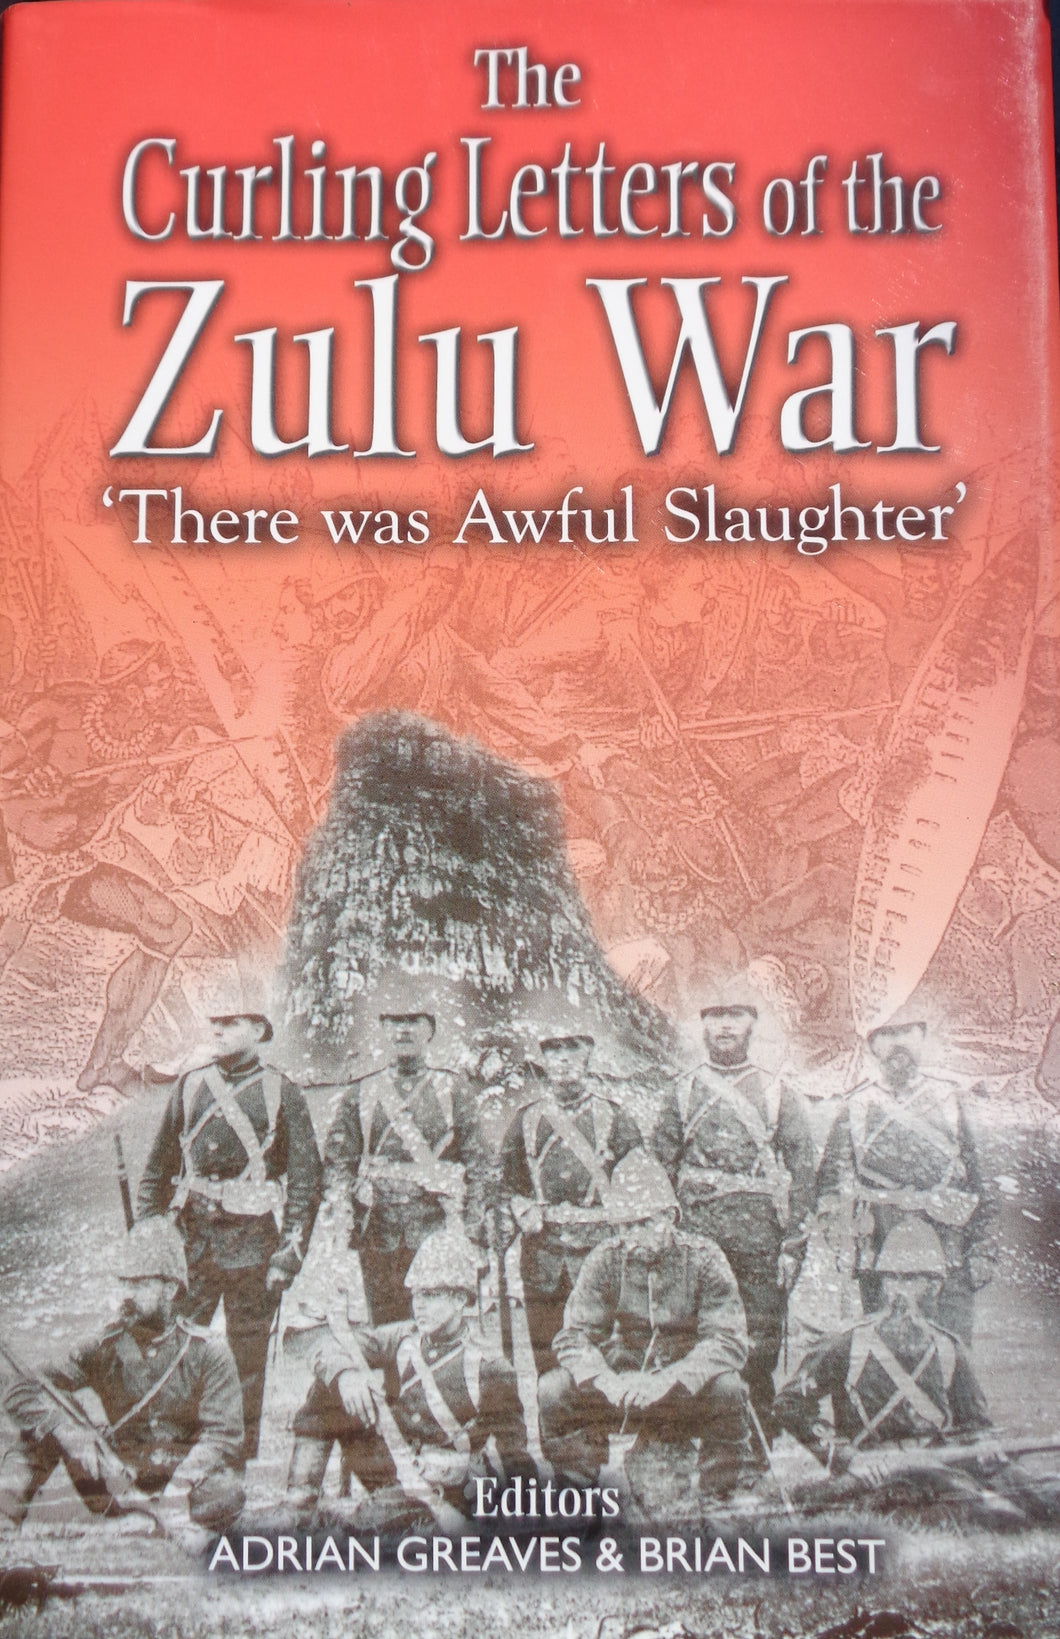 'THE CURLING LETTERS OF THE ZULU WAR' edited by Adrian Greaves and Brian Best